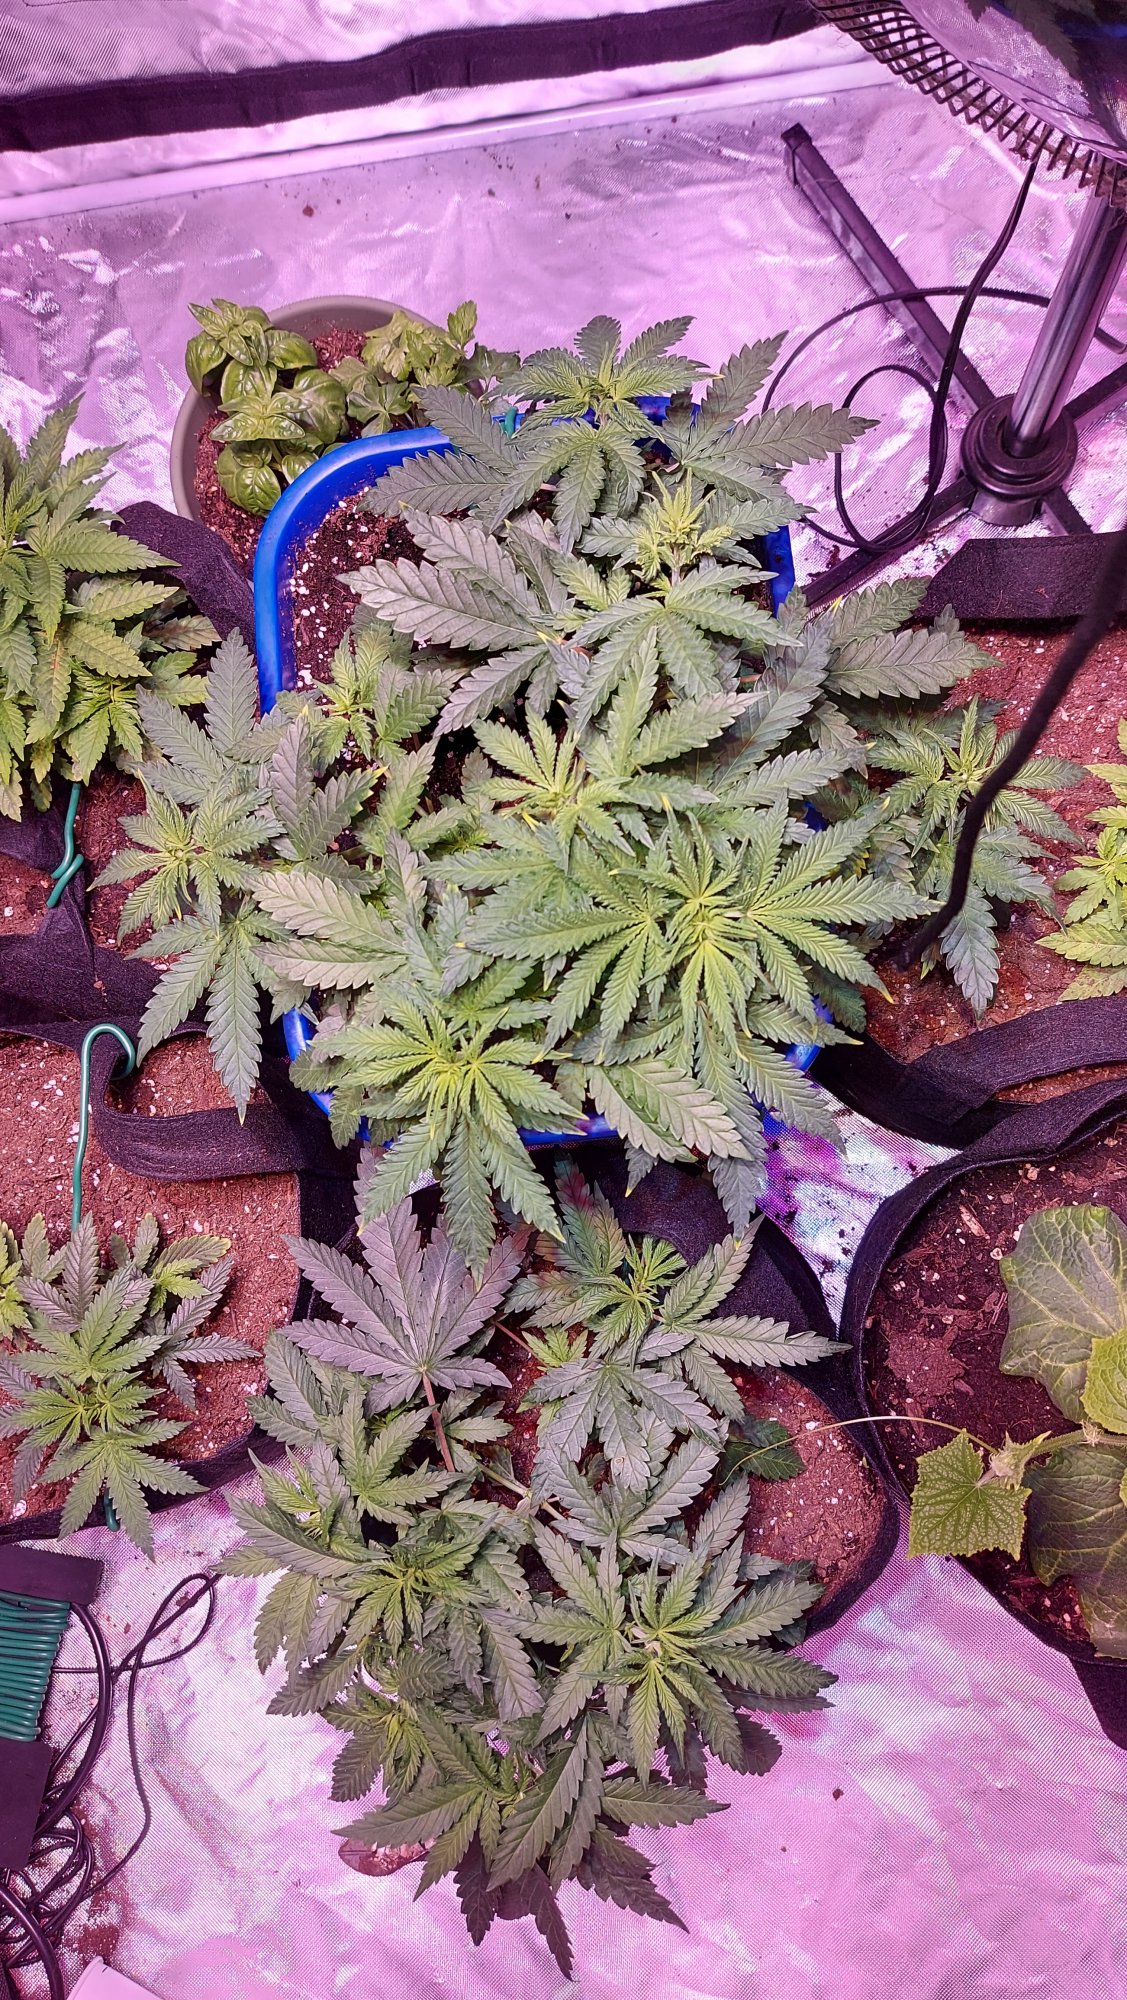 Diaries of my first grow ever  with pics 6